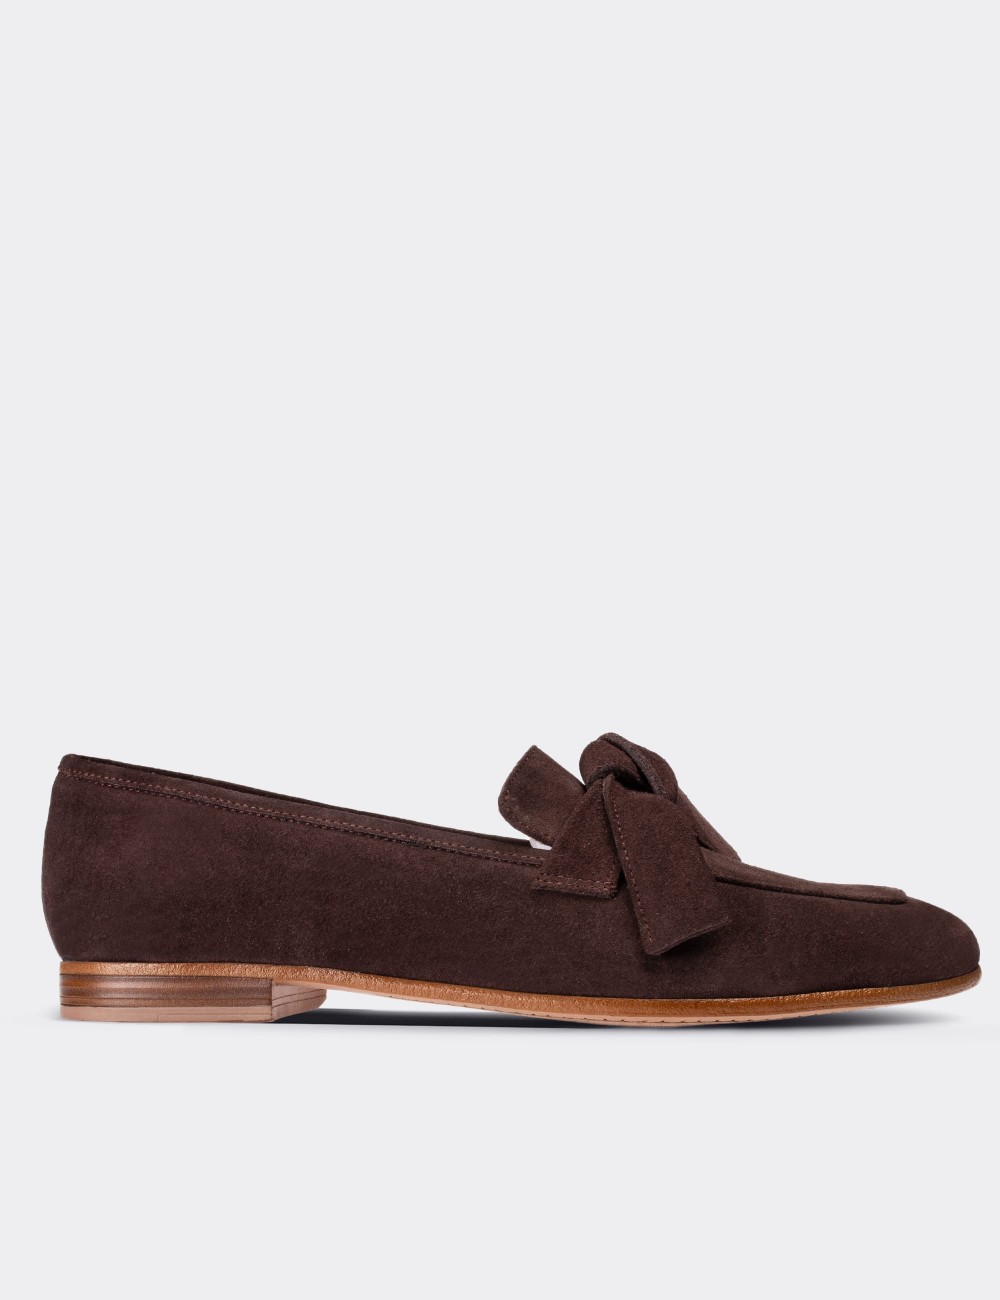 Brown Suede Leather Loafers - 01744ZKHVM01